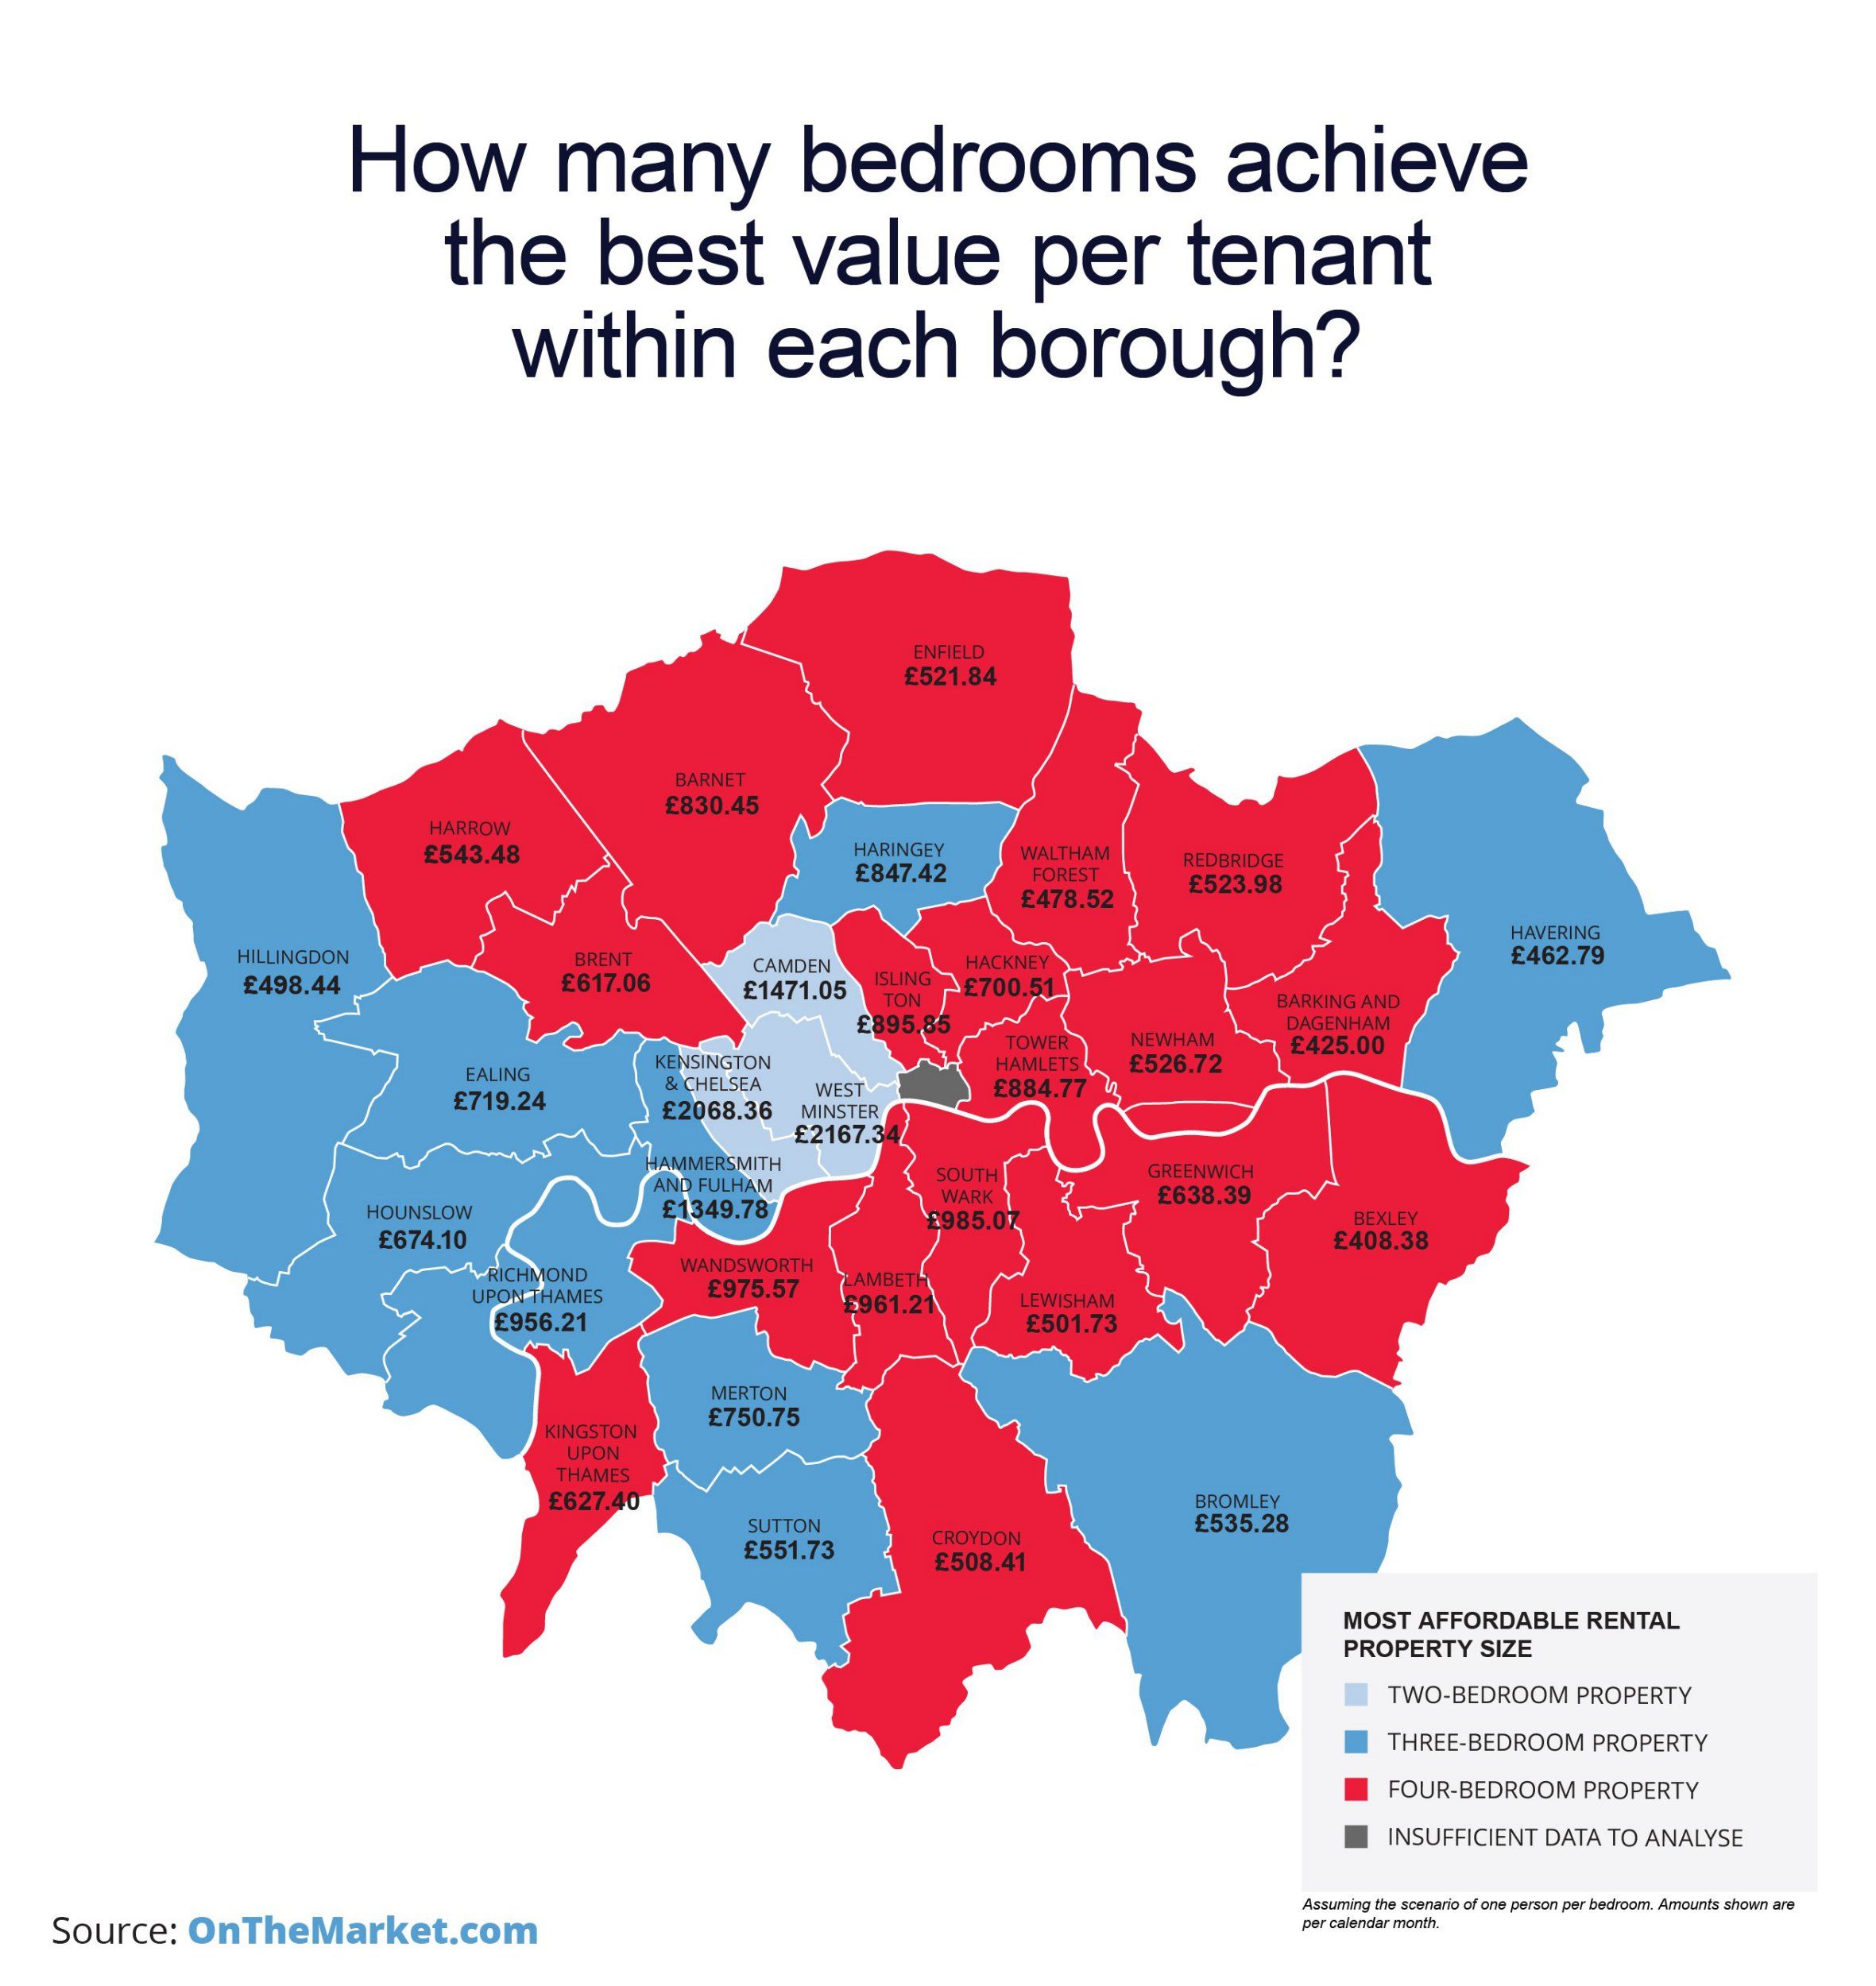 An infographic which shows how many bedrooms achieve the best value per tenant within each borough